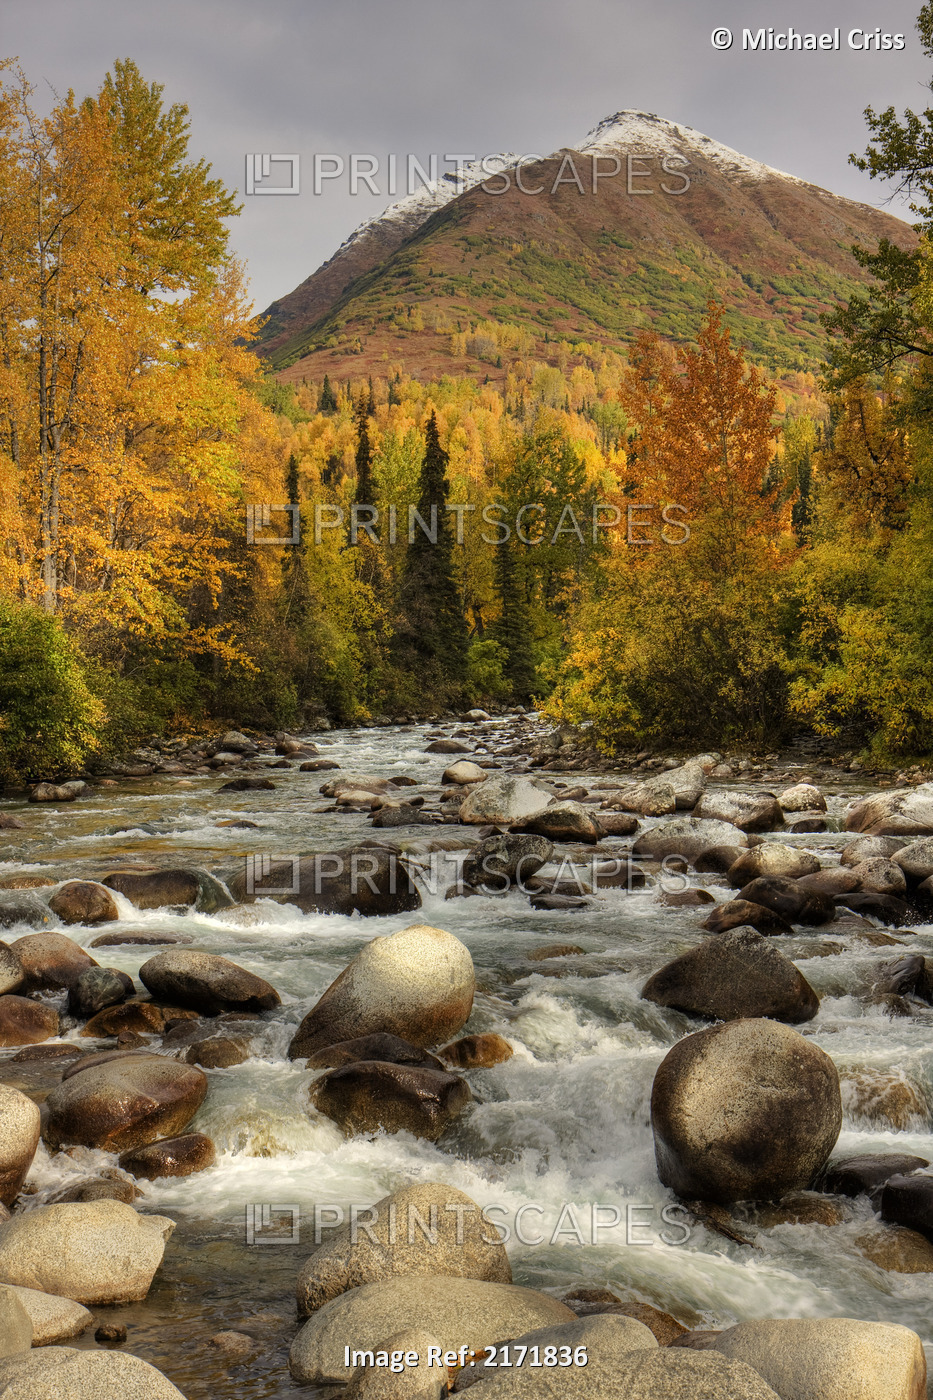 Scenic View Of The Little Susitna River At The Entrance To Hatcher Pass During ...